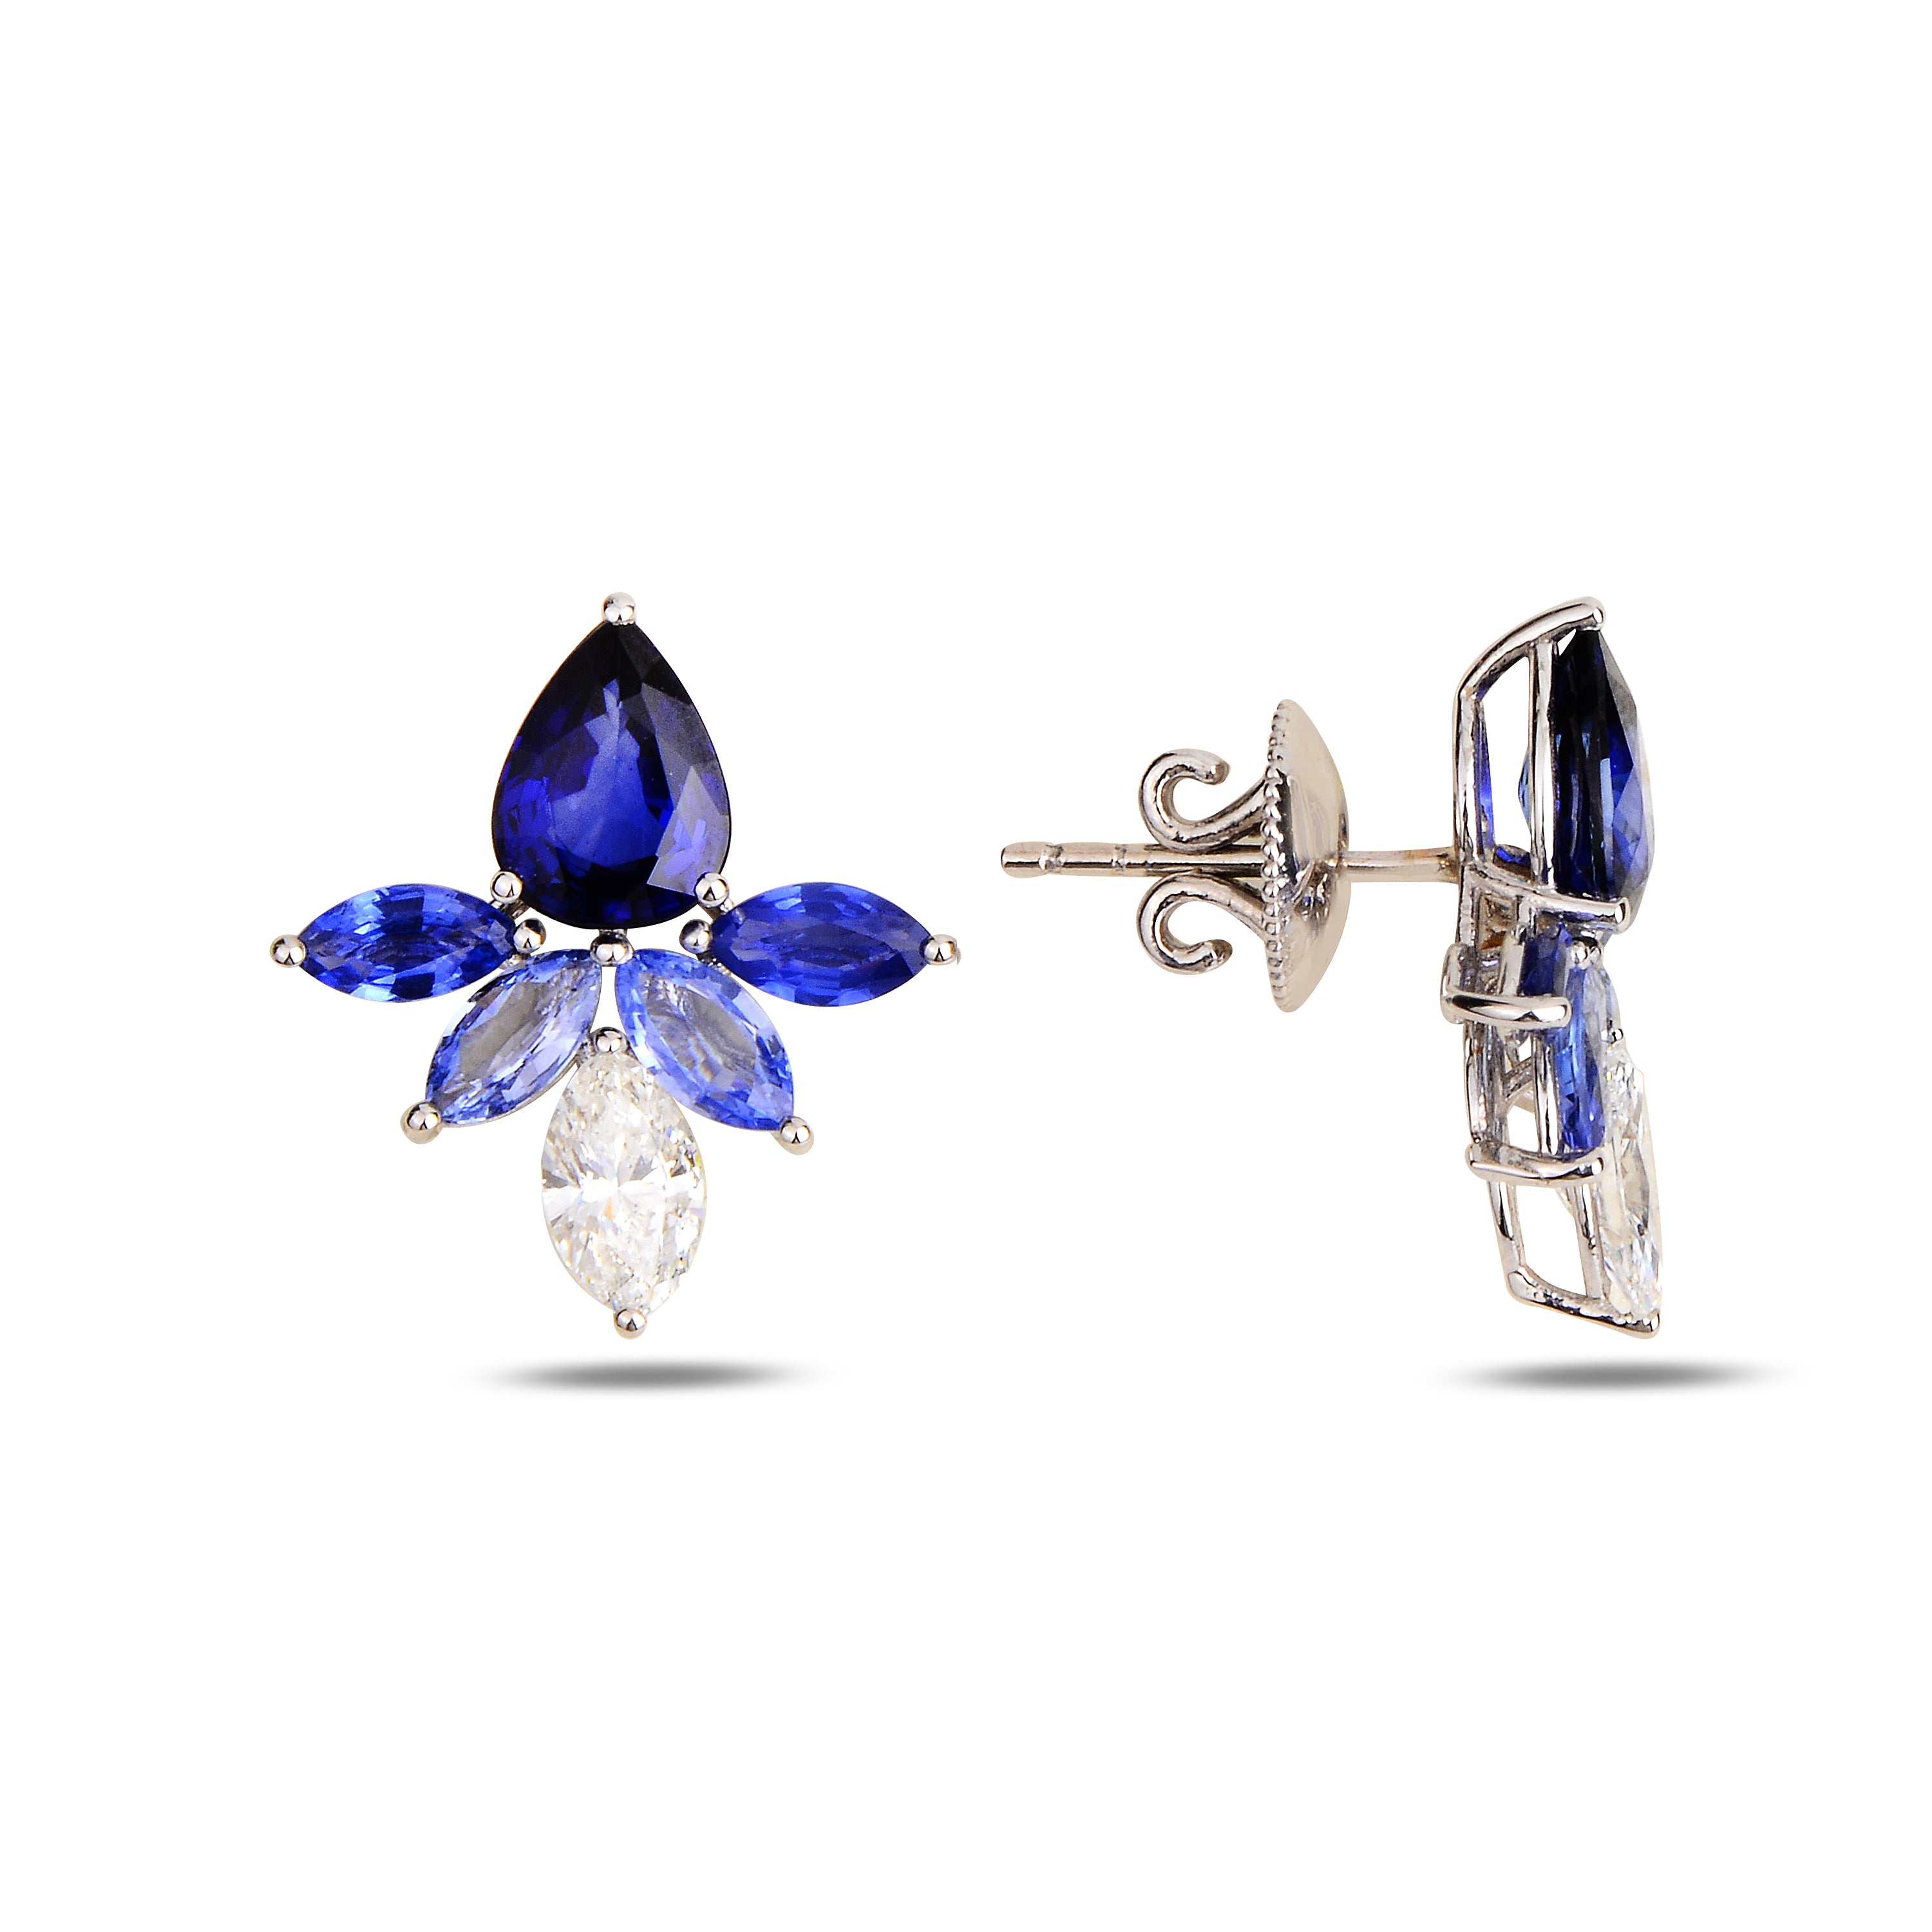 Star Earrings with Blue Sapphire, Limited Edition